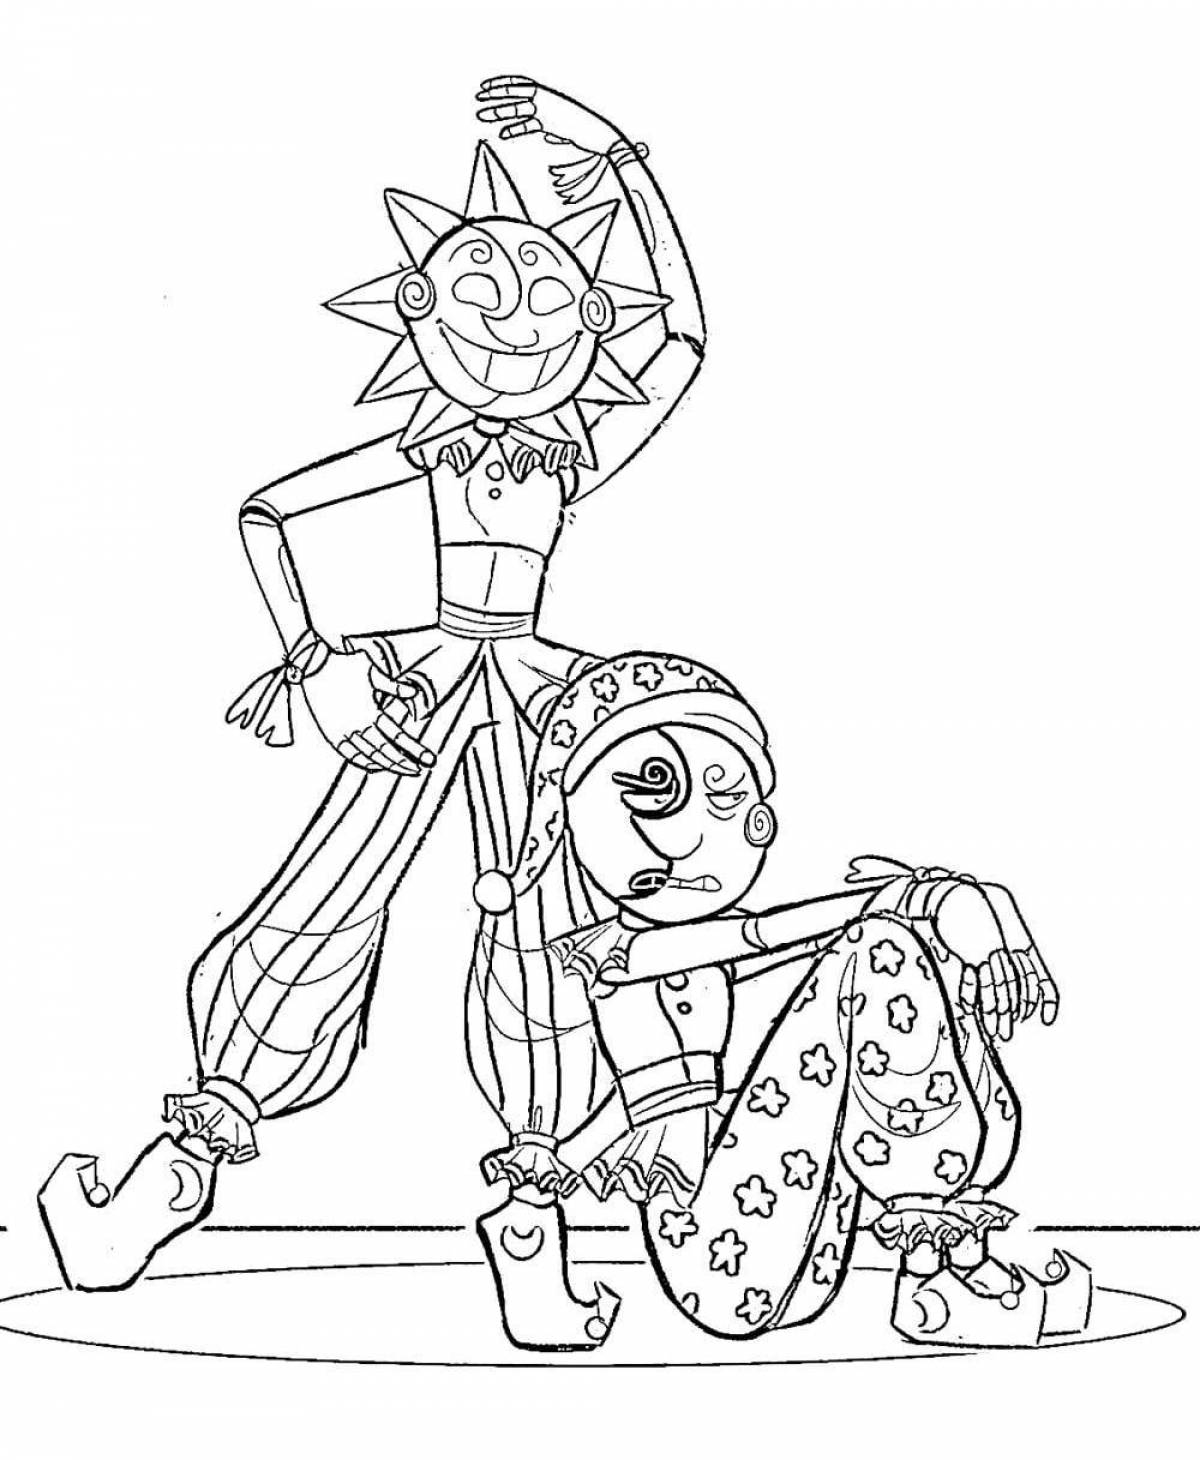 Radiant coloring page moondrop and sanddrop